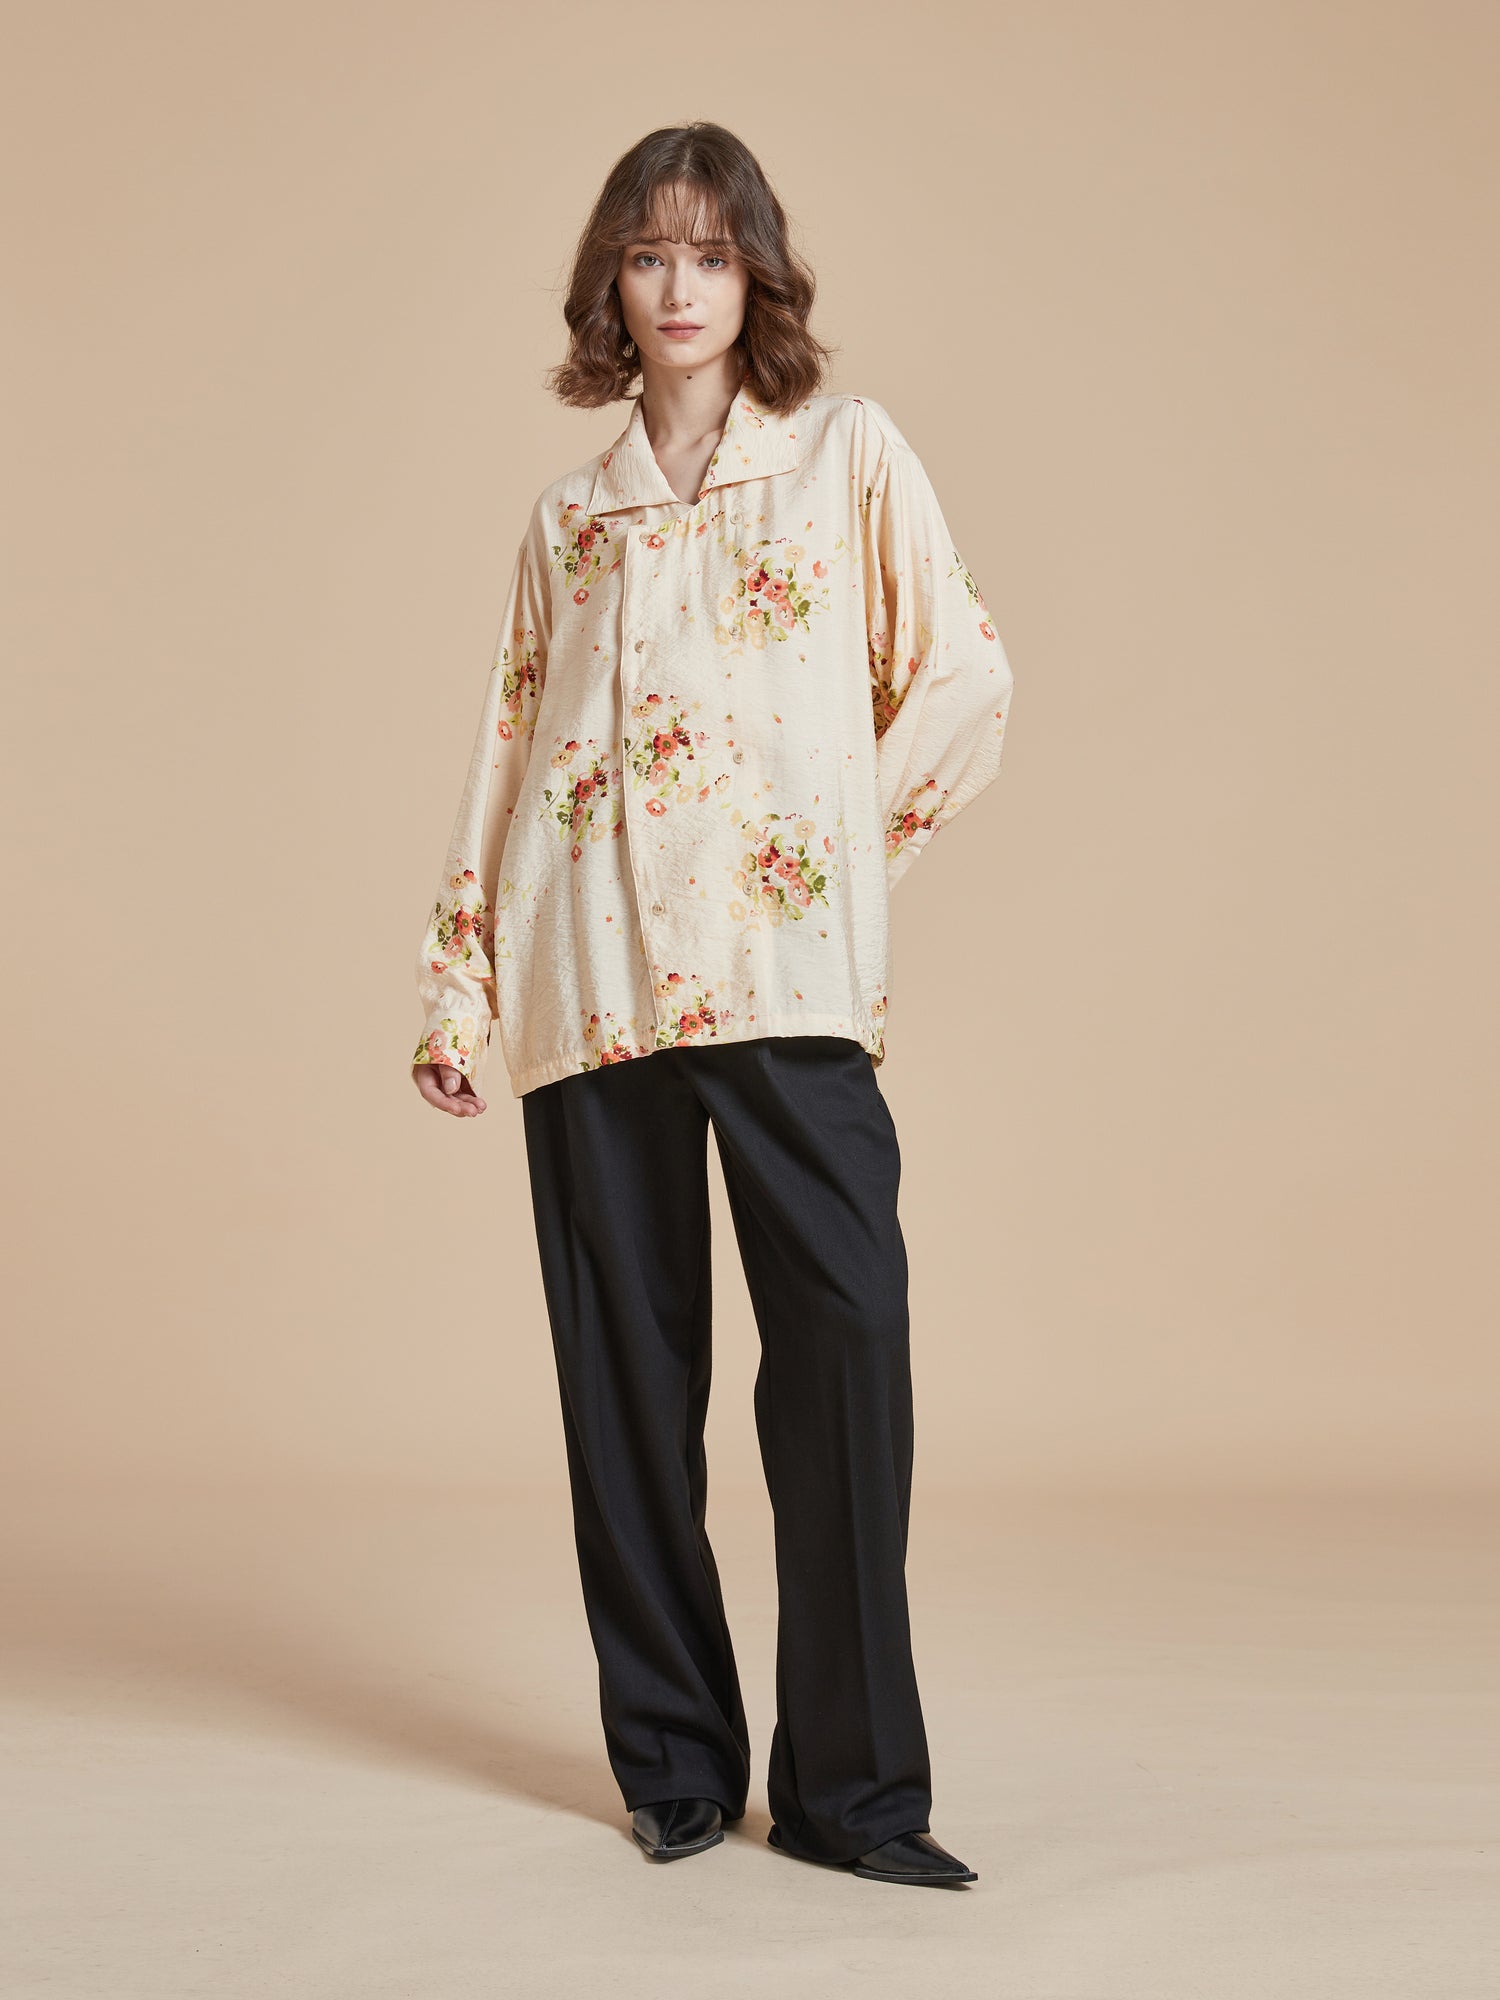 The model is wearing a Found Kanhati Garden Long Sleeve Camp Shirt with a floral print.